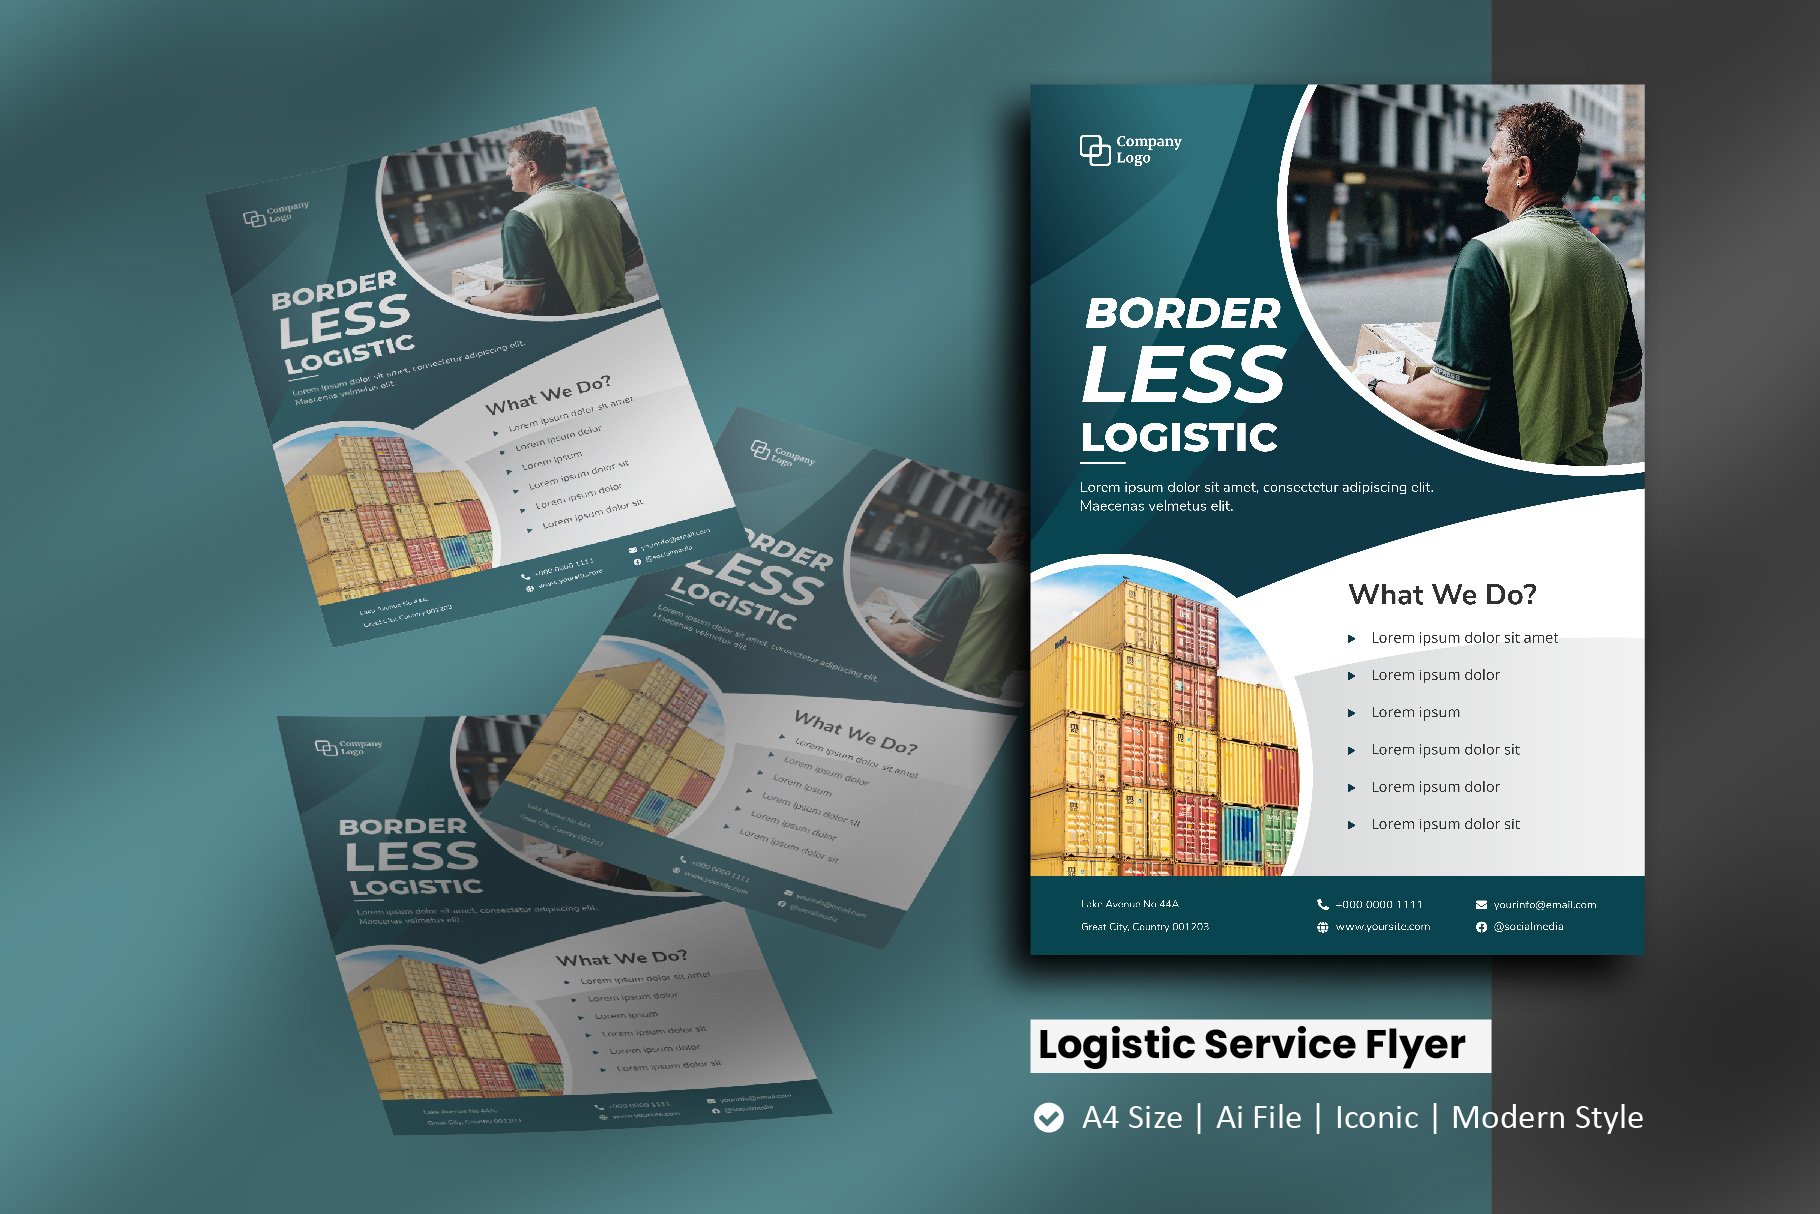 Logistic Service Brochure Template cover image.